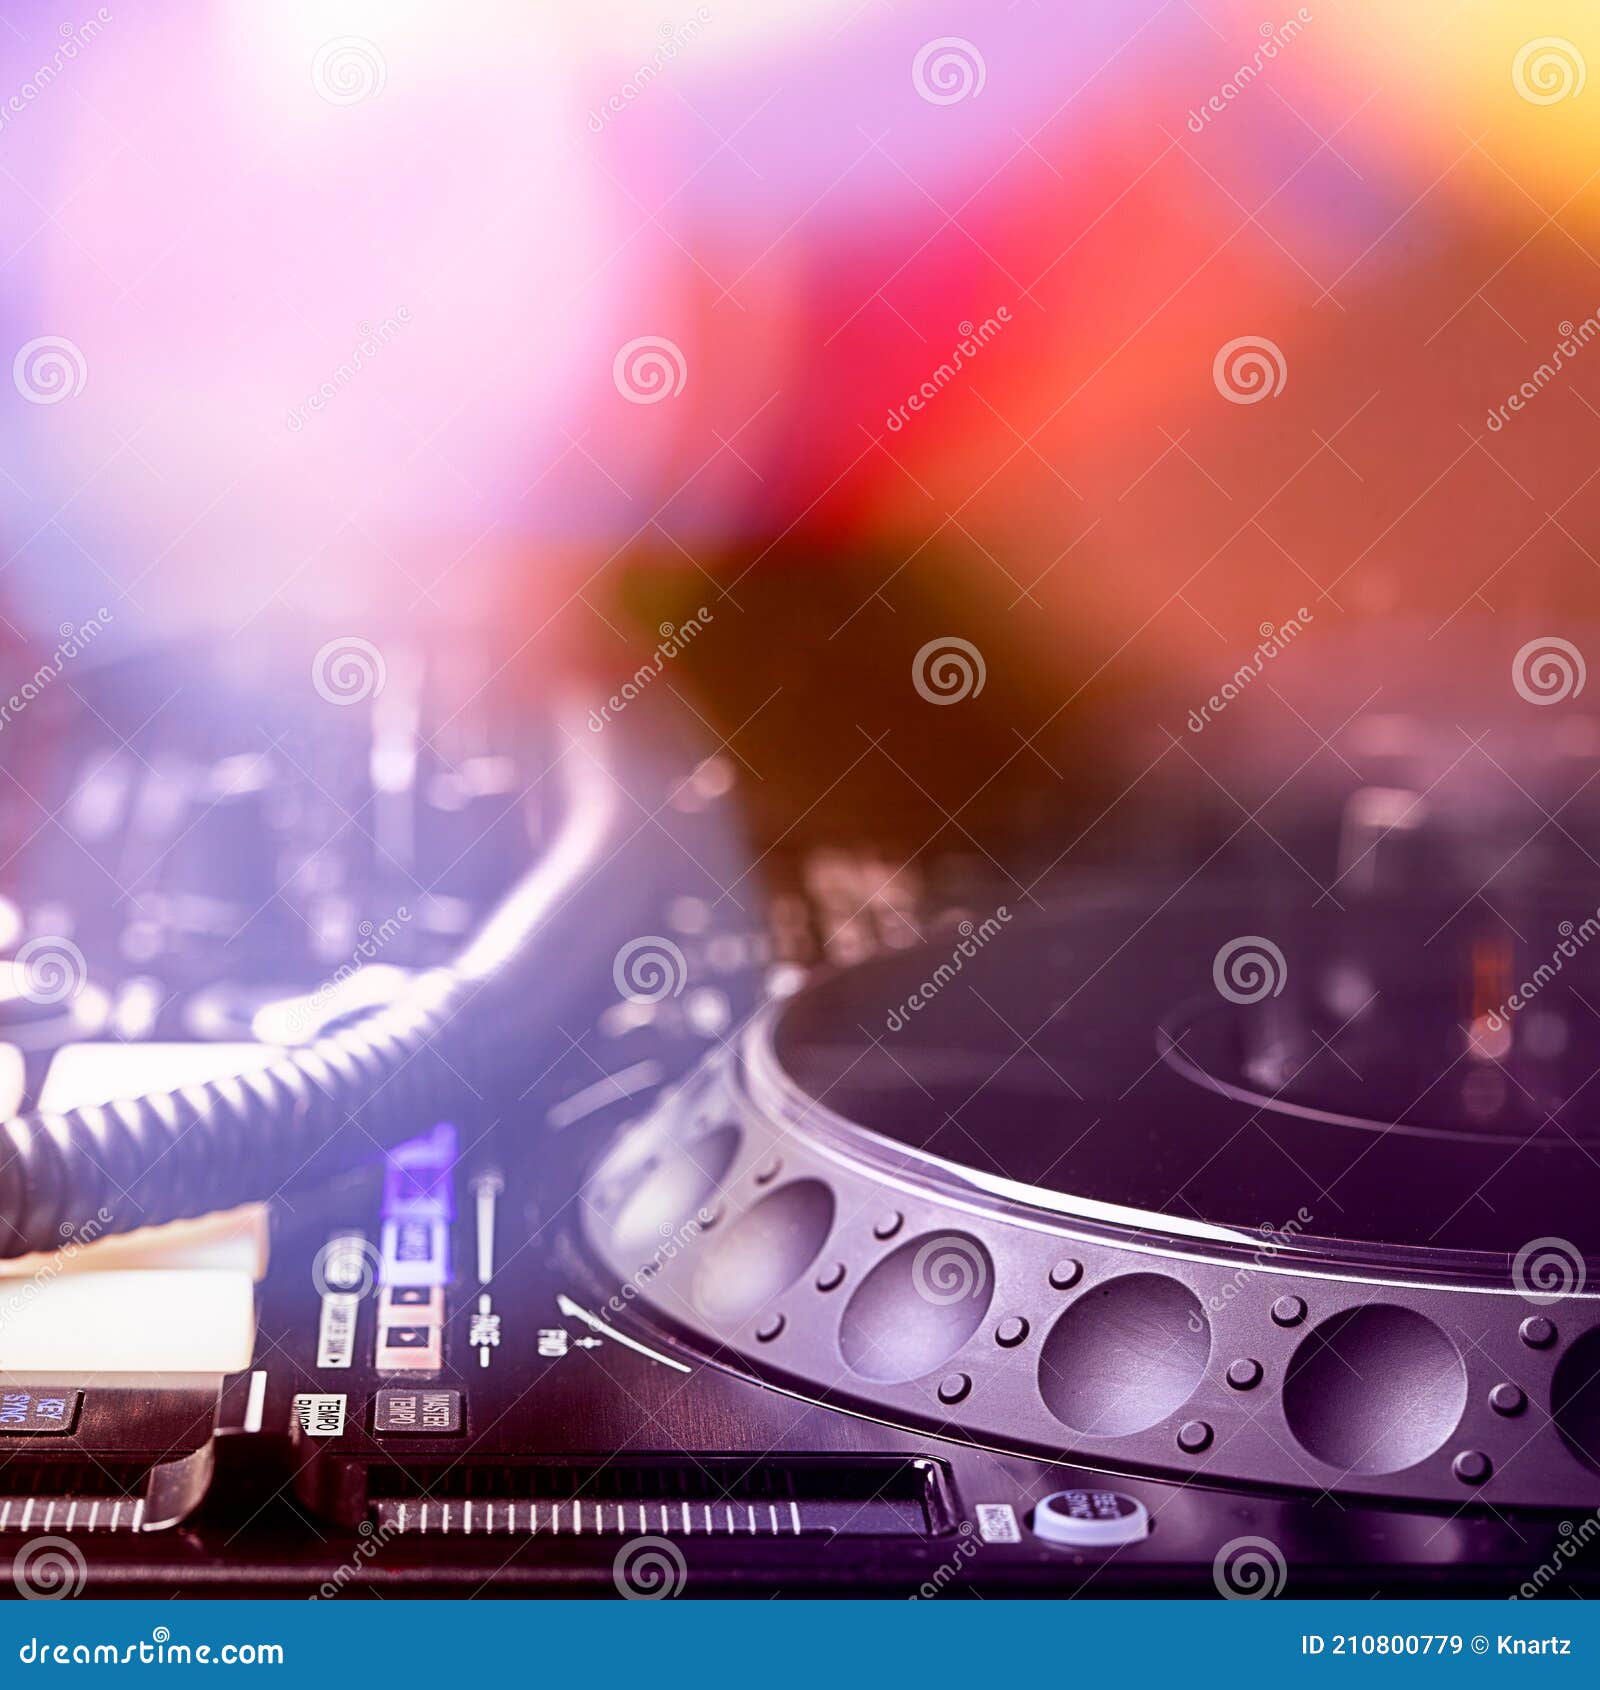 Dj Equipment in Blurred Background Stock Image - Image of control, level:  210800779